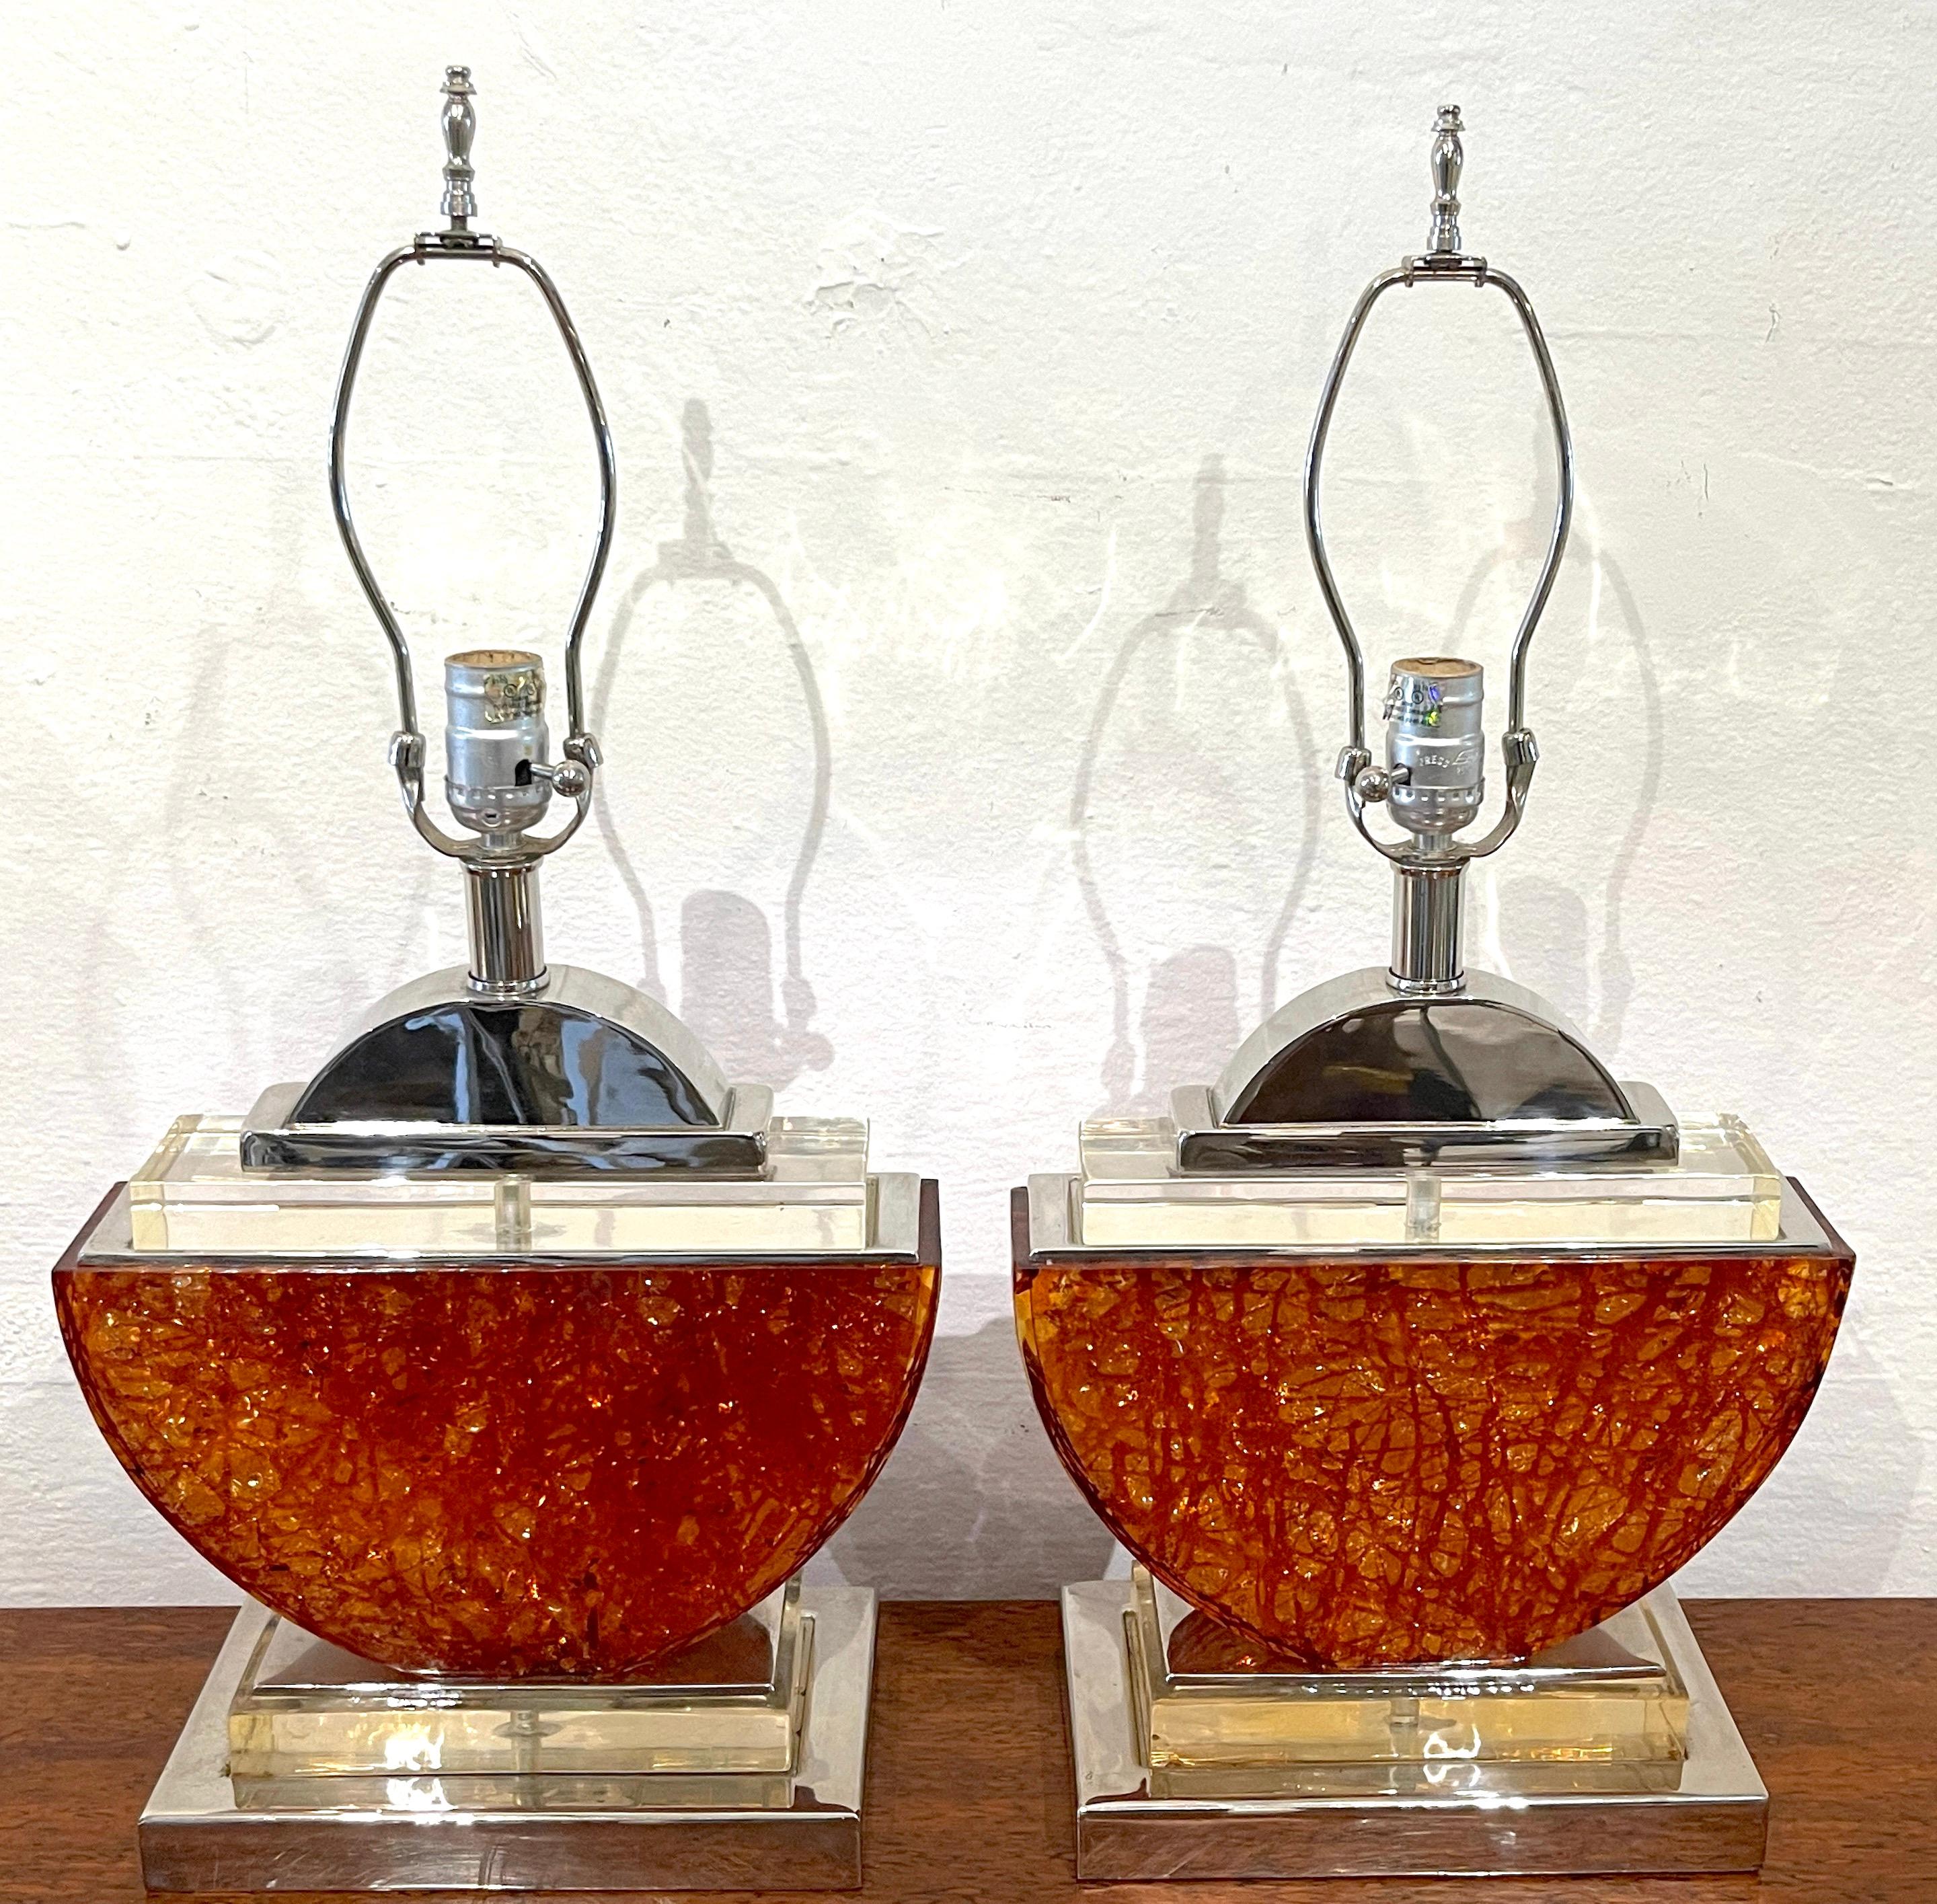 Pair of French 1980s Silver-Plated Bronze & Orange Lucite Half-Moon Table Lamps 
France, 1980s

A fabulous pair of sculptural post -modern/ 1980s iconic style lamps, hard to find. Each sculptural lamp of substantial size and weight, crafted of